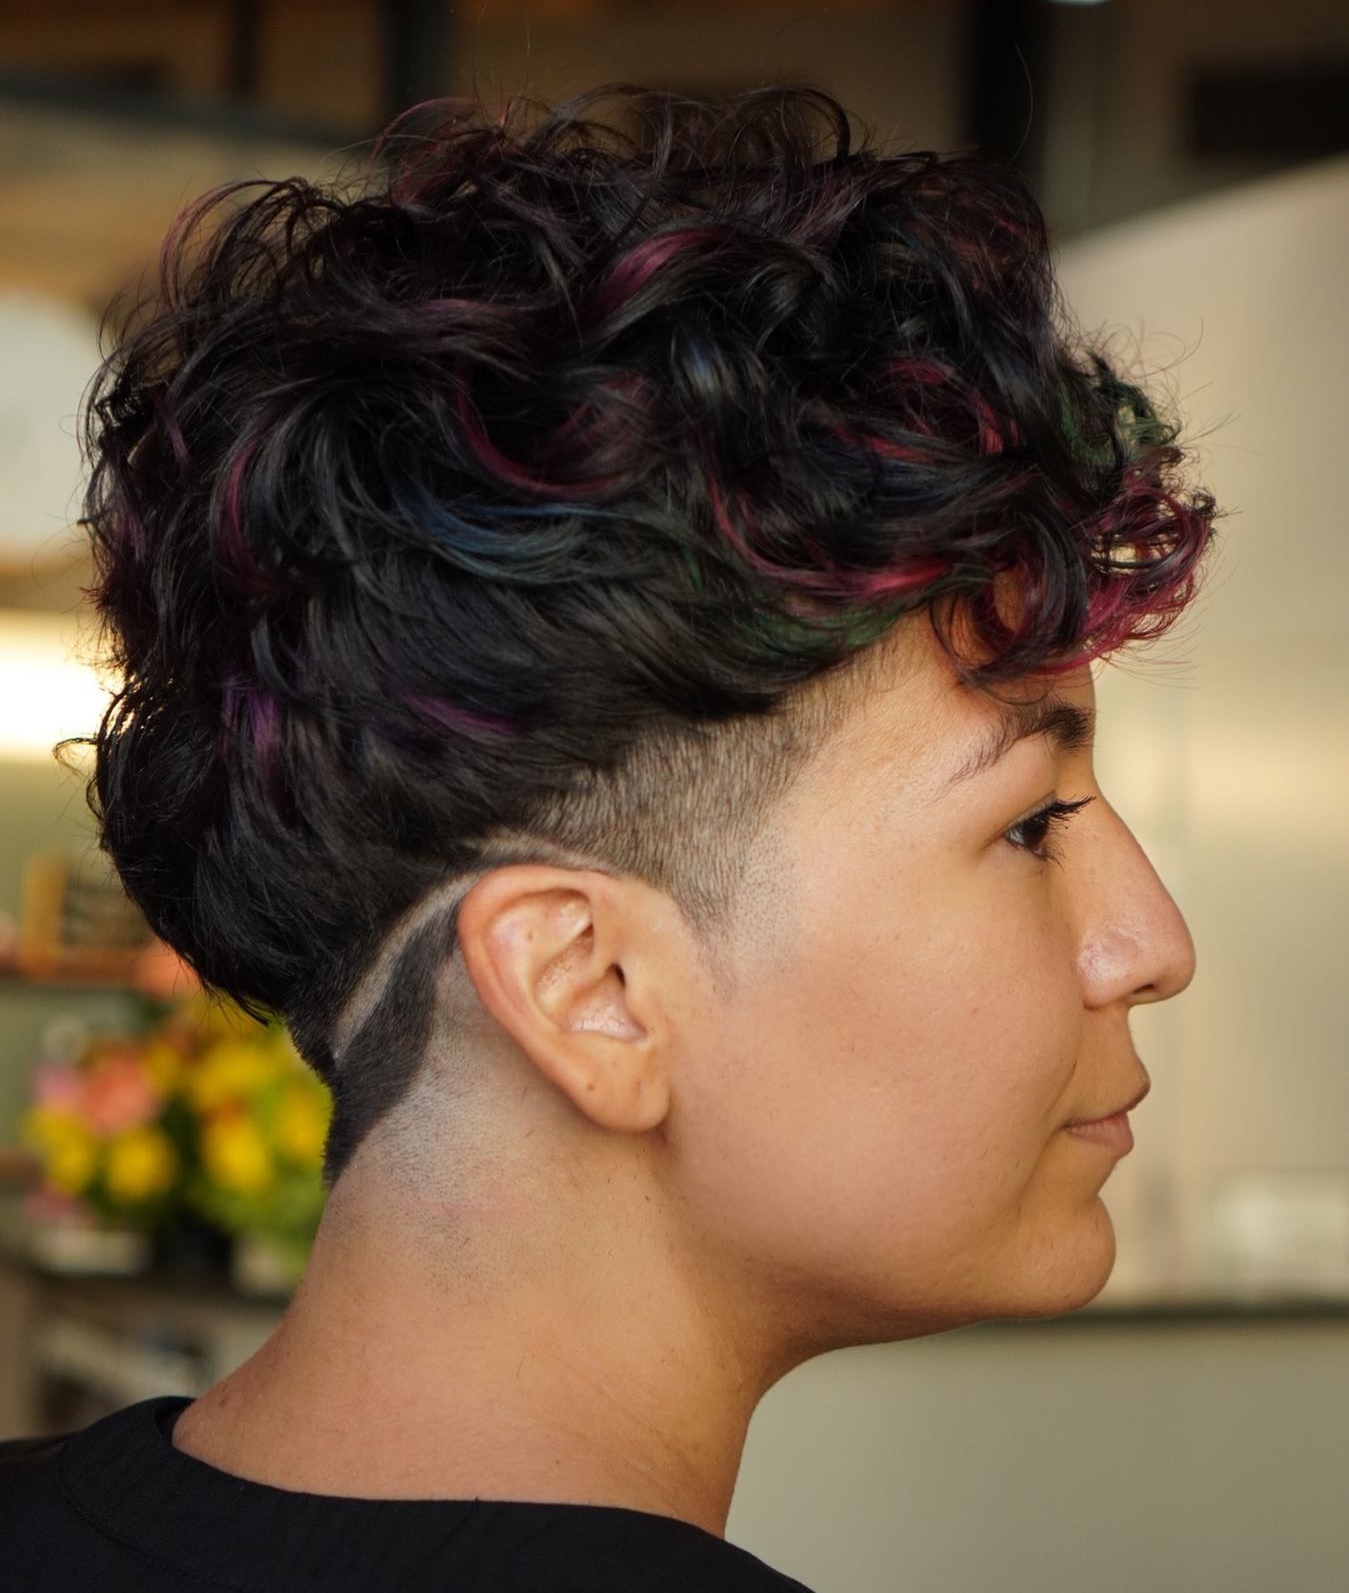 Edgy Curly Pixie on Black Hair with Red Highlights